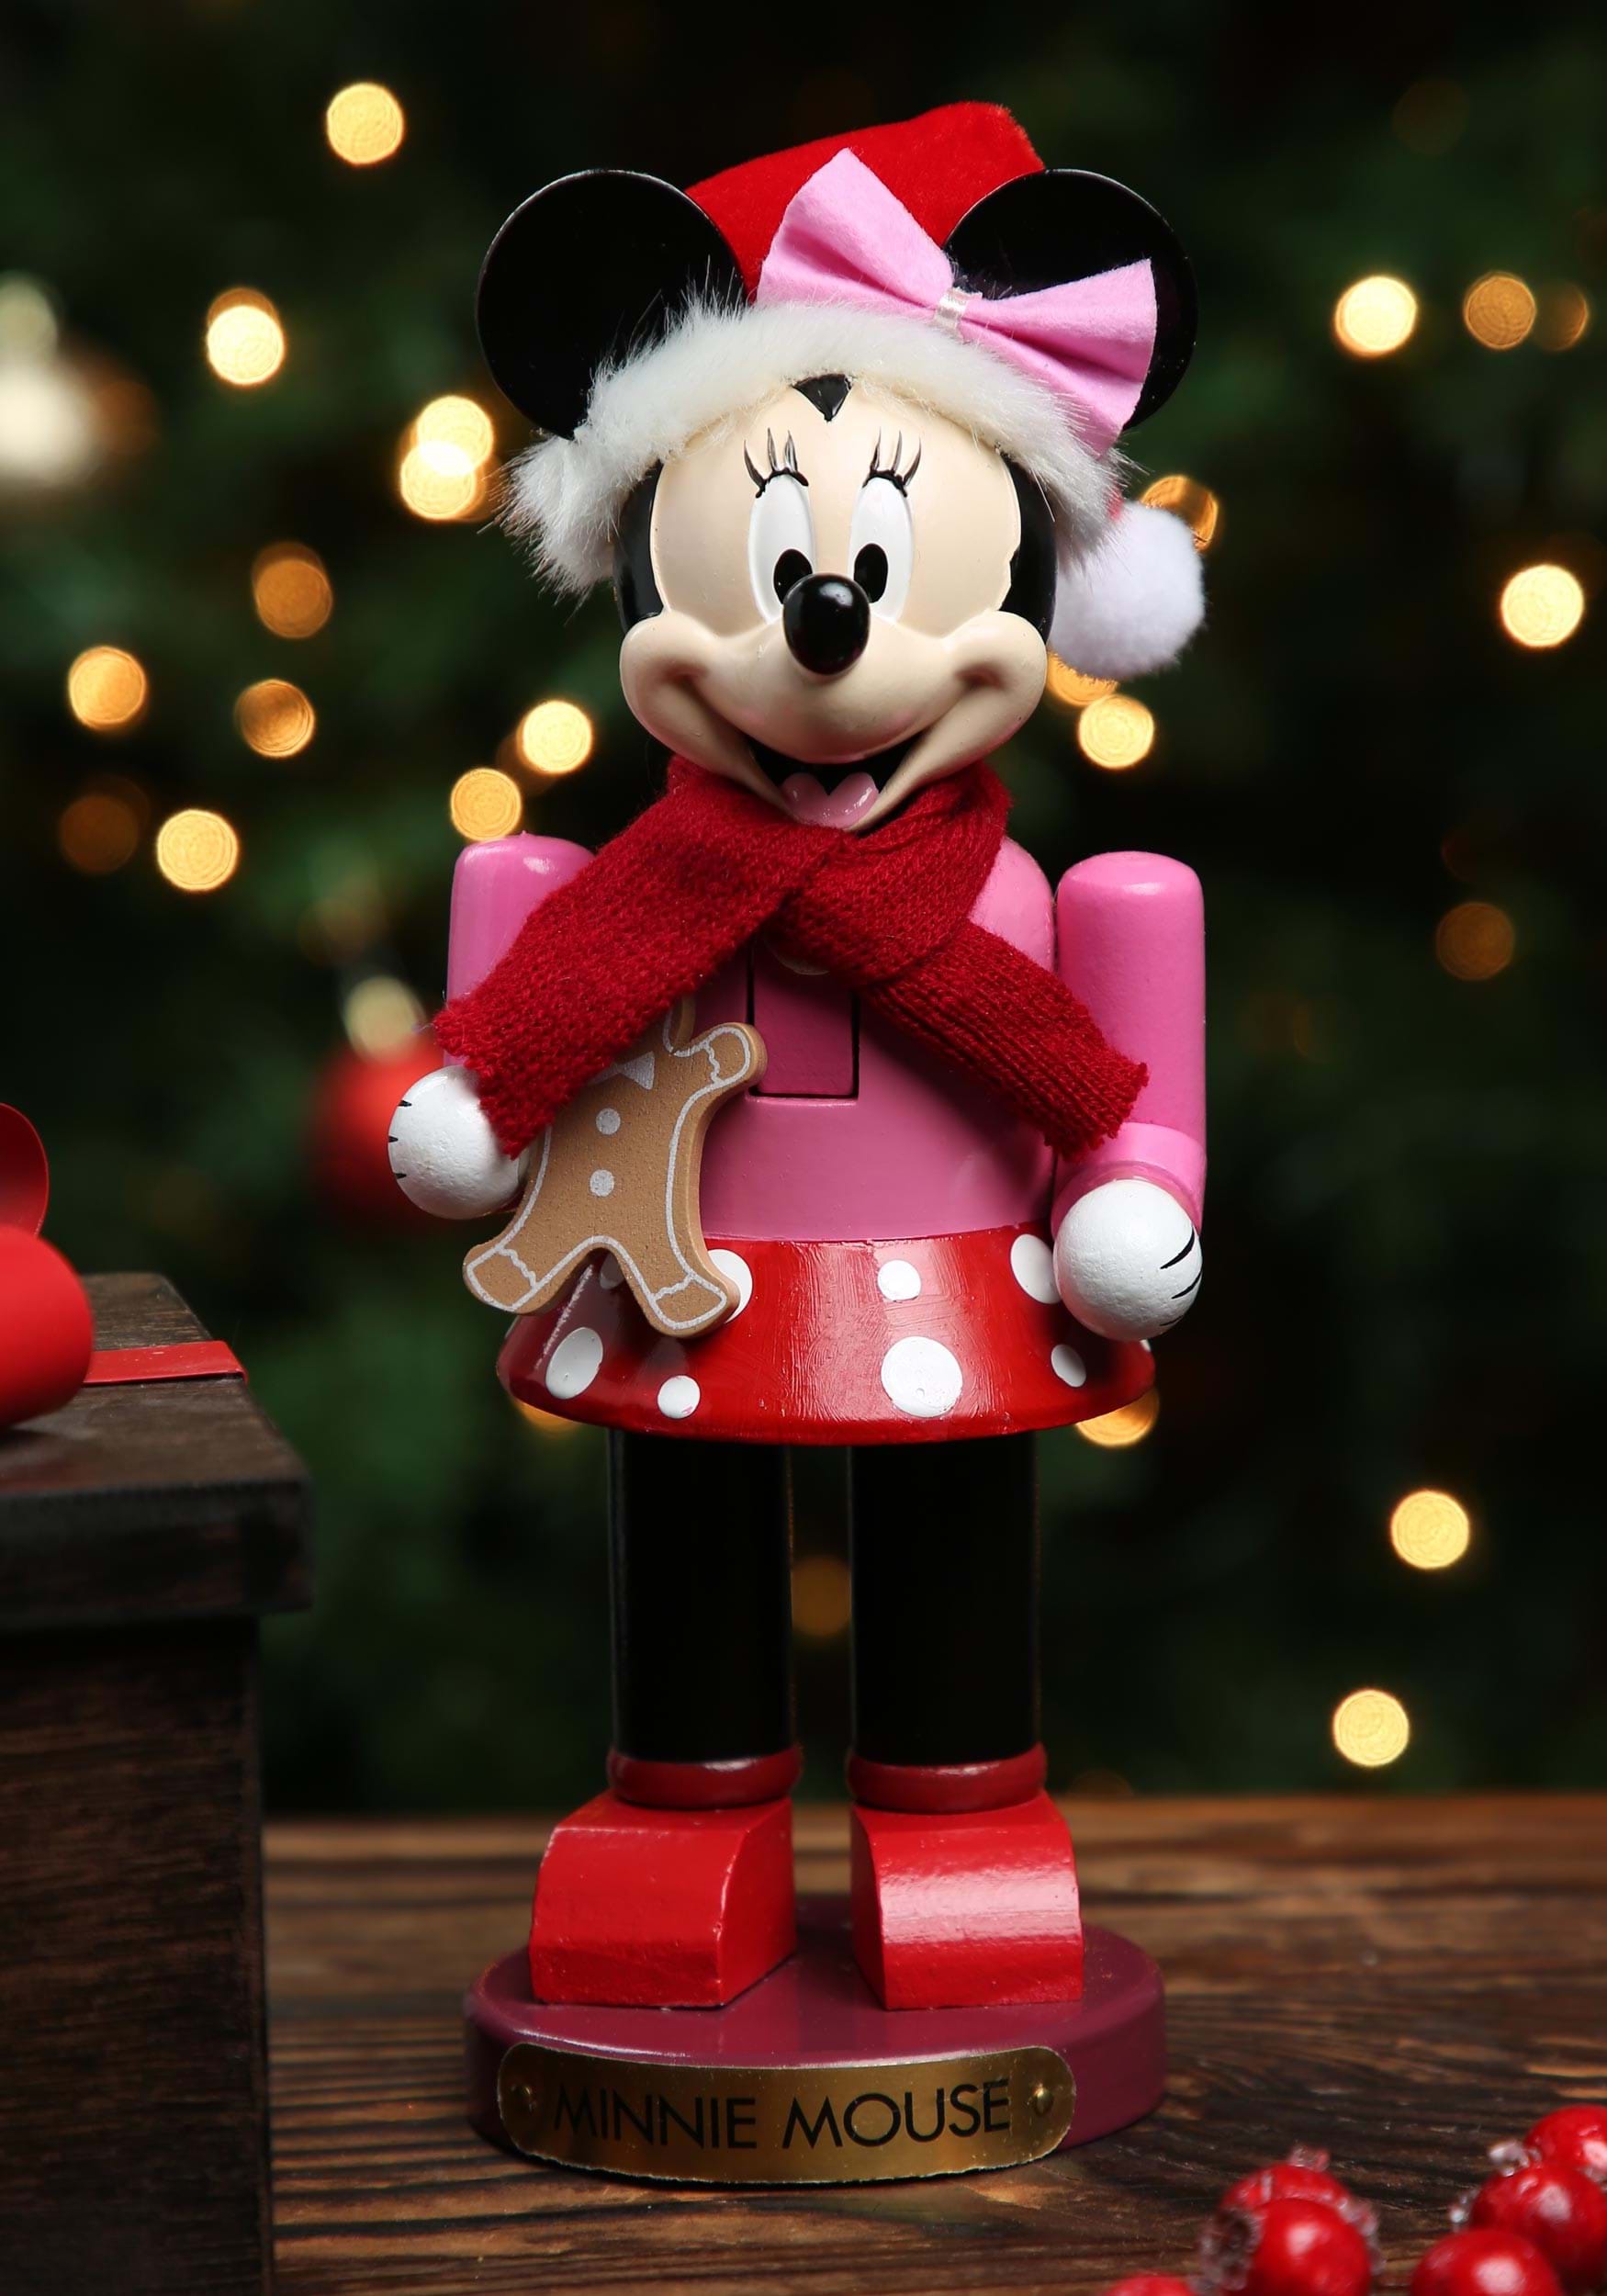 Minnie Mouse Nutcracker with Gingerbread Man